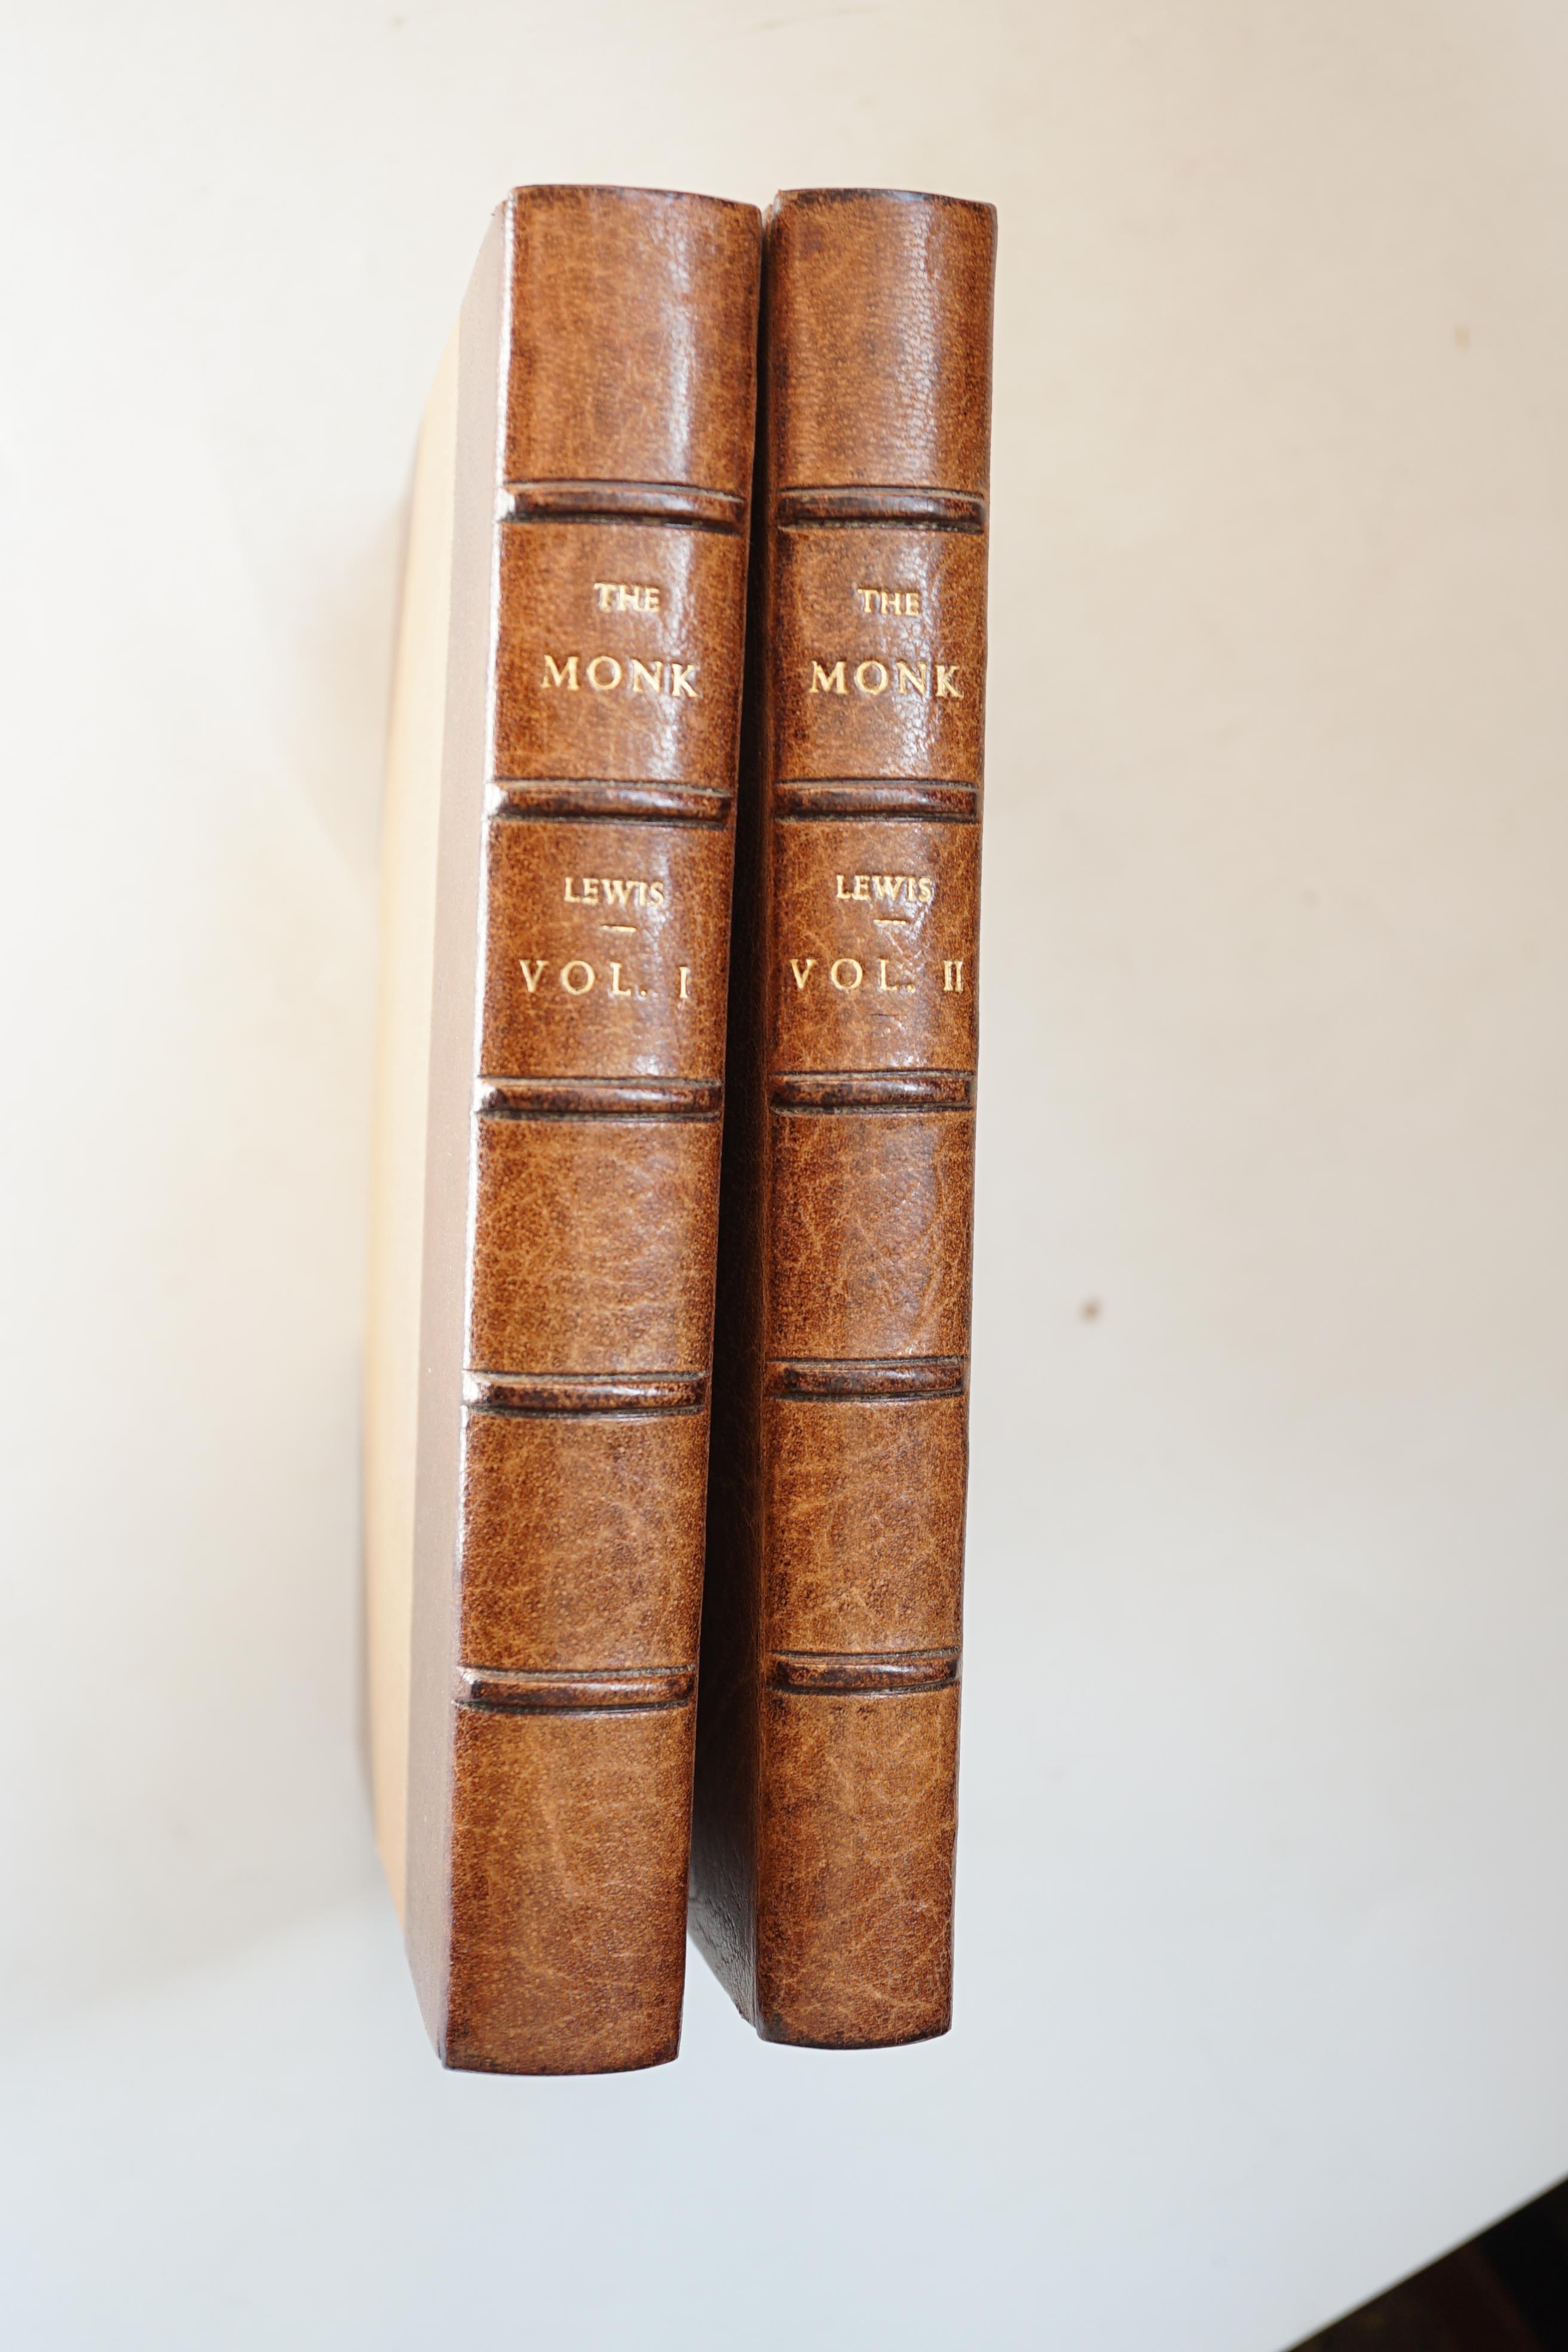 Lewis, Matthew G. - The Monk. A Romance, 2 vols, 8vo, half tan morocco, portrait frontispiece, ‘’The present edition of ‘’The Monk’’ is an unabridged reprint of the exceedingly rare first edition of the work published in